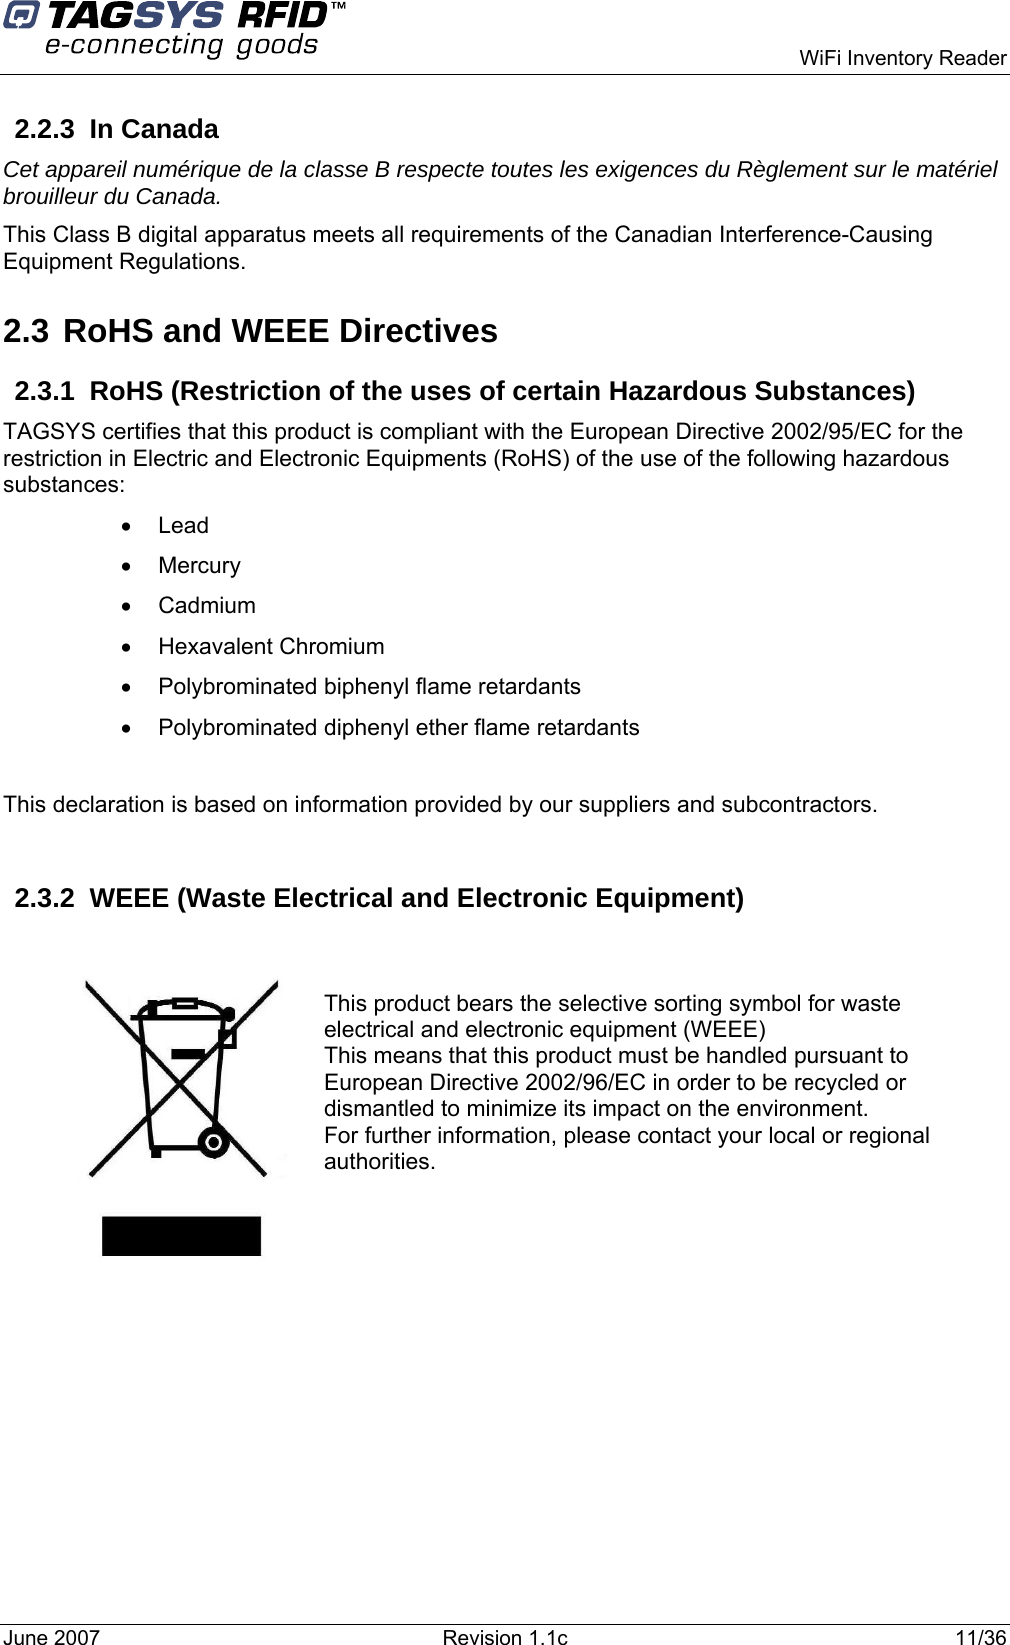    WiFi Inventory Reader 2.2.3 In Canada Cet appareil numérique de la classe B respecte toutes les exigences du Règlement sur le matériel brouilleur du Canada. This Class B digital apparatus meets all requirements of the Canadian Interference-Causing Equipment Regulations. 2.3 RoHS and WEEE Directives 2.3.1  RoHS (Restriction of the uses of certain Hazardous Substances) TAGSYS certifies that this product is compliant with the European Directive 2002/95/EC for the restriction in Electric and Electronic Equipments (RoHS) of the use of the following hazardous substances: • Lead • Mercury • Cadmium • Hexavalent Chromium •  Polybrominated biphenyl flame retardants •  Polybrominated diphenyl ether flame retardants  This declaration is based on information provided by our suppliers and subcontractors.  2.3.2 WEEE (Waste Electrical and Electronic Equipment)     This product bears the selective sorting symbol for waste electrical and electronic equipment (WEEE) This means that this product must be handled pursuant to European Directive 2002/96/EC in order to be recycled or dismantled to minimize its impact on the environment. For further information, please contact your local or regional authorities. June 2007  Revision 1.1c  11/36  